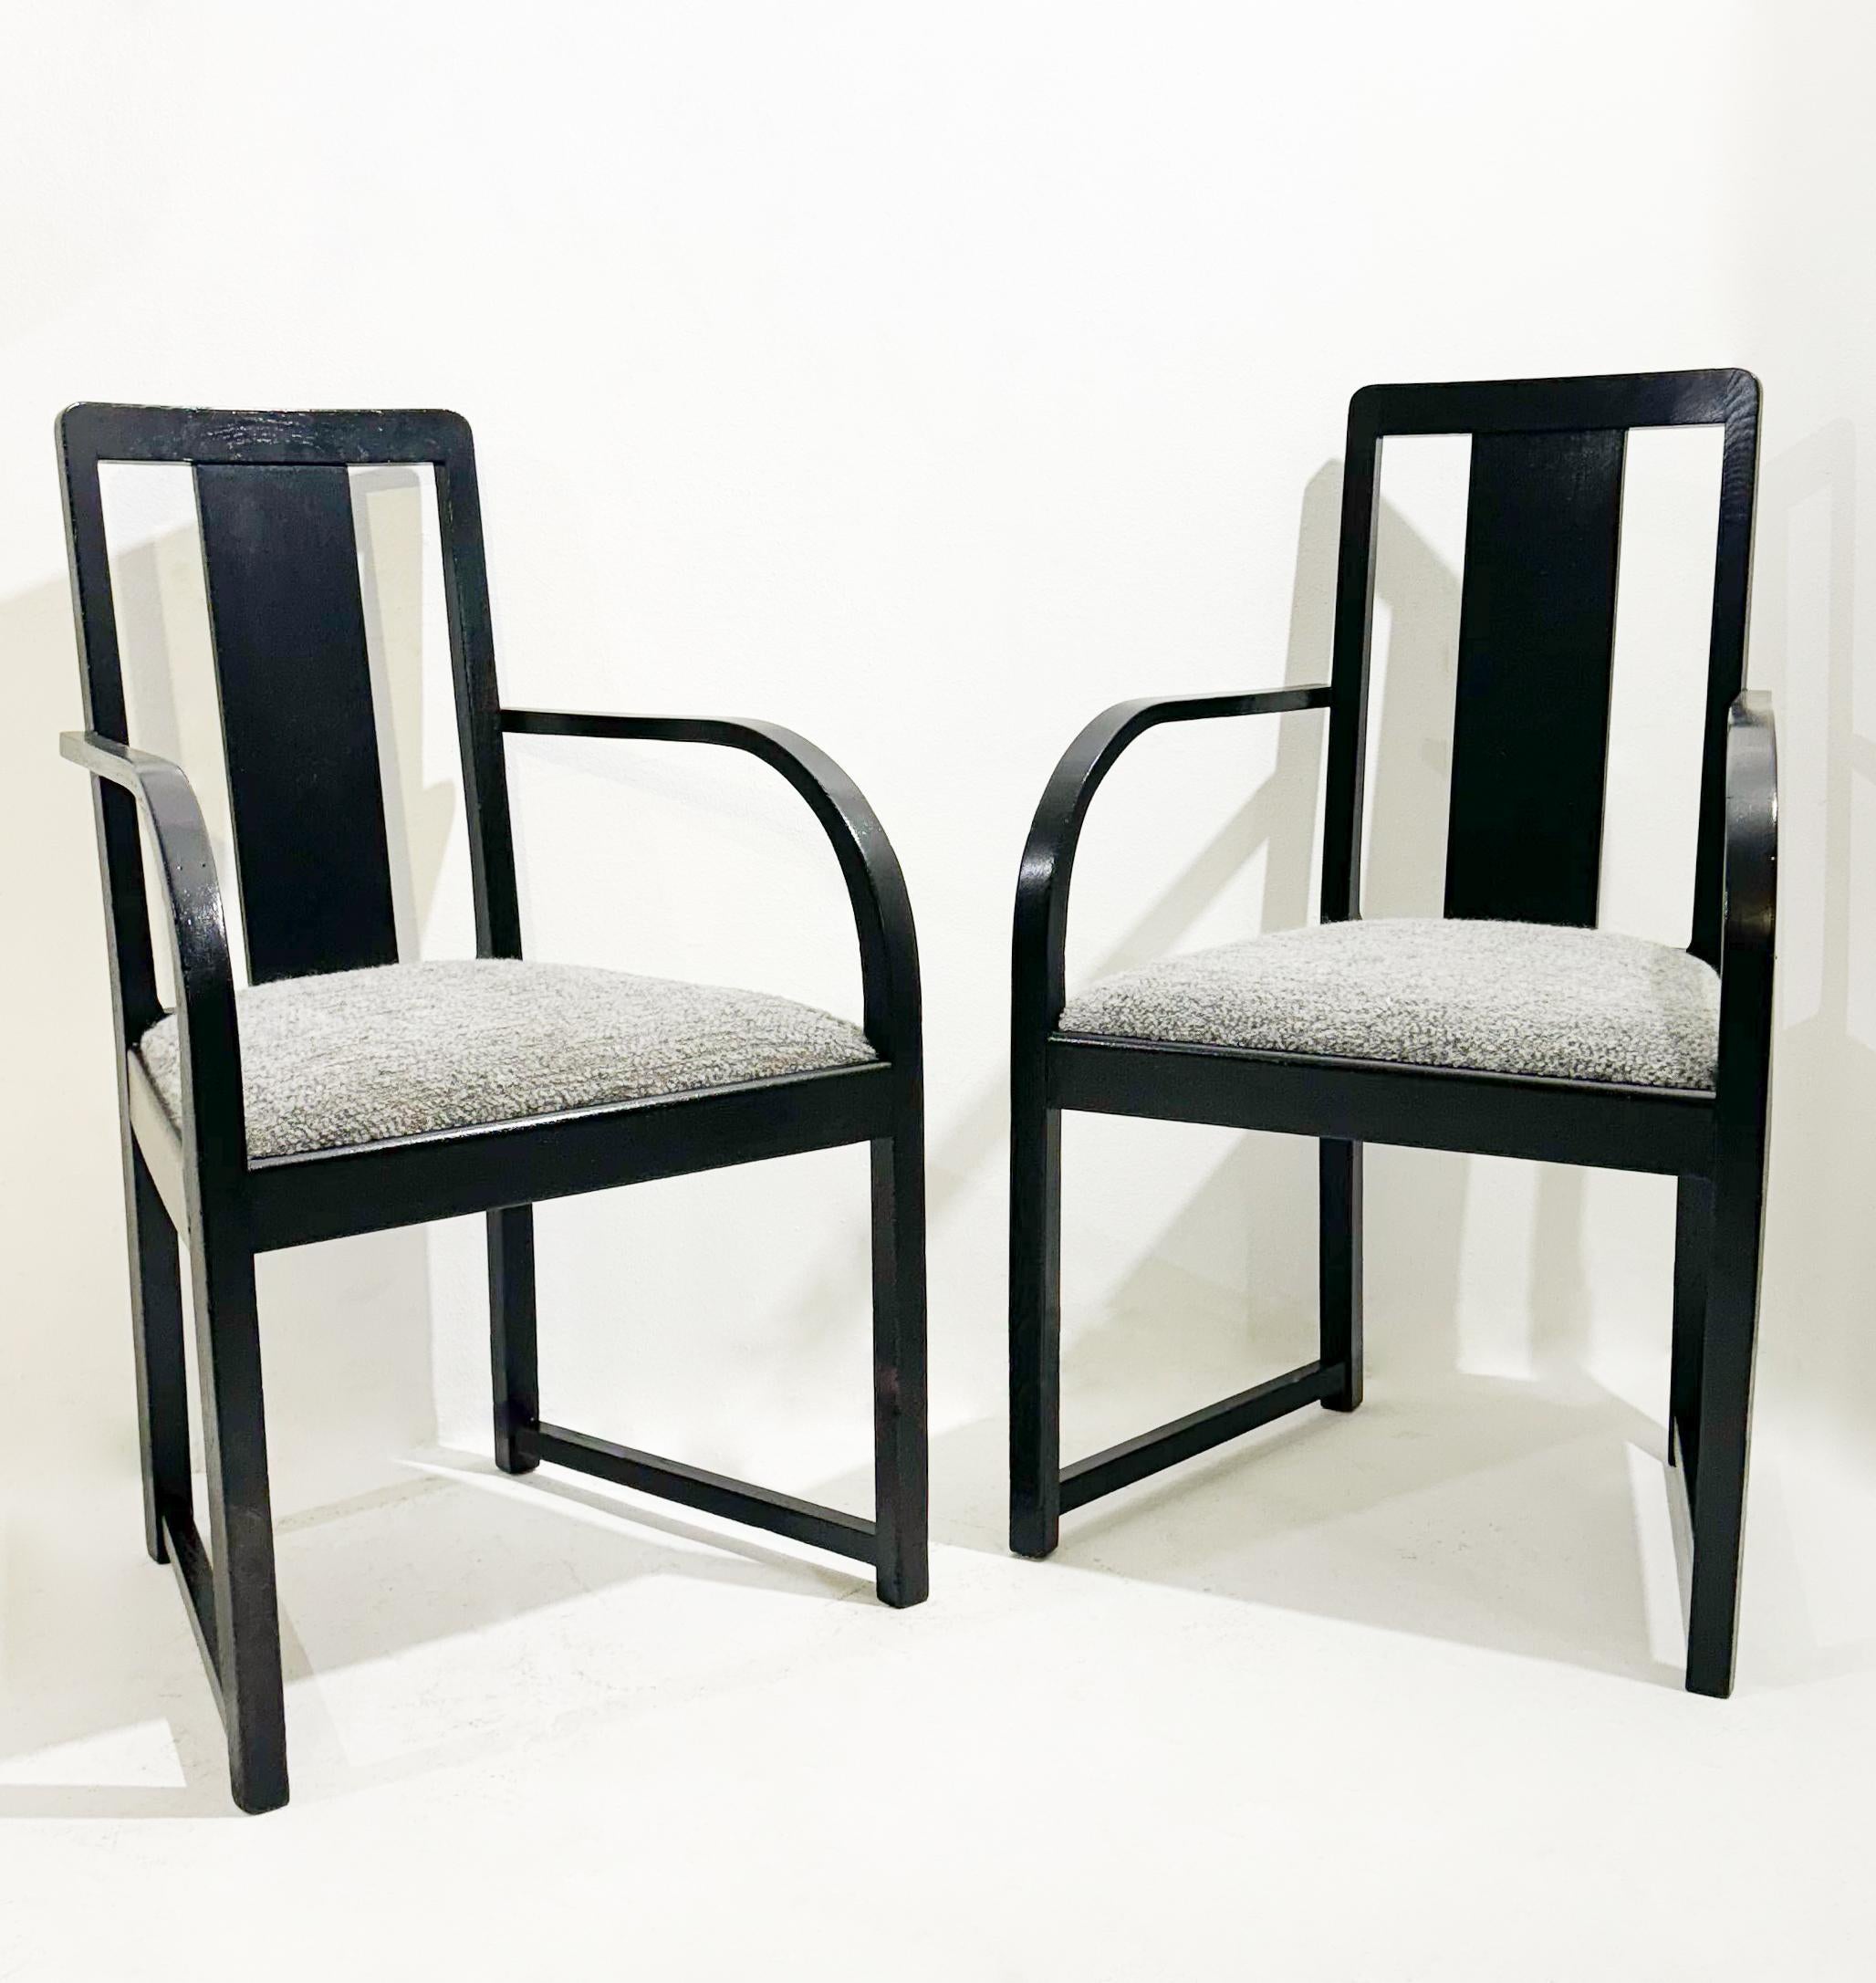 					
           
Pair of Wood and Fabric Armchairs, circa 1920